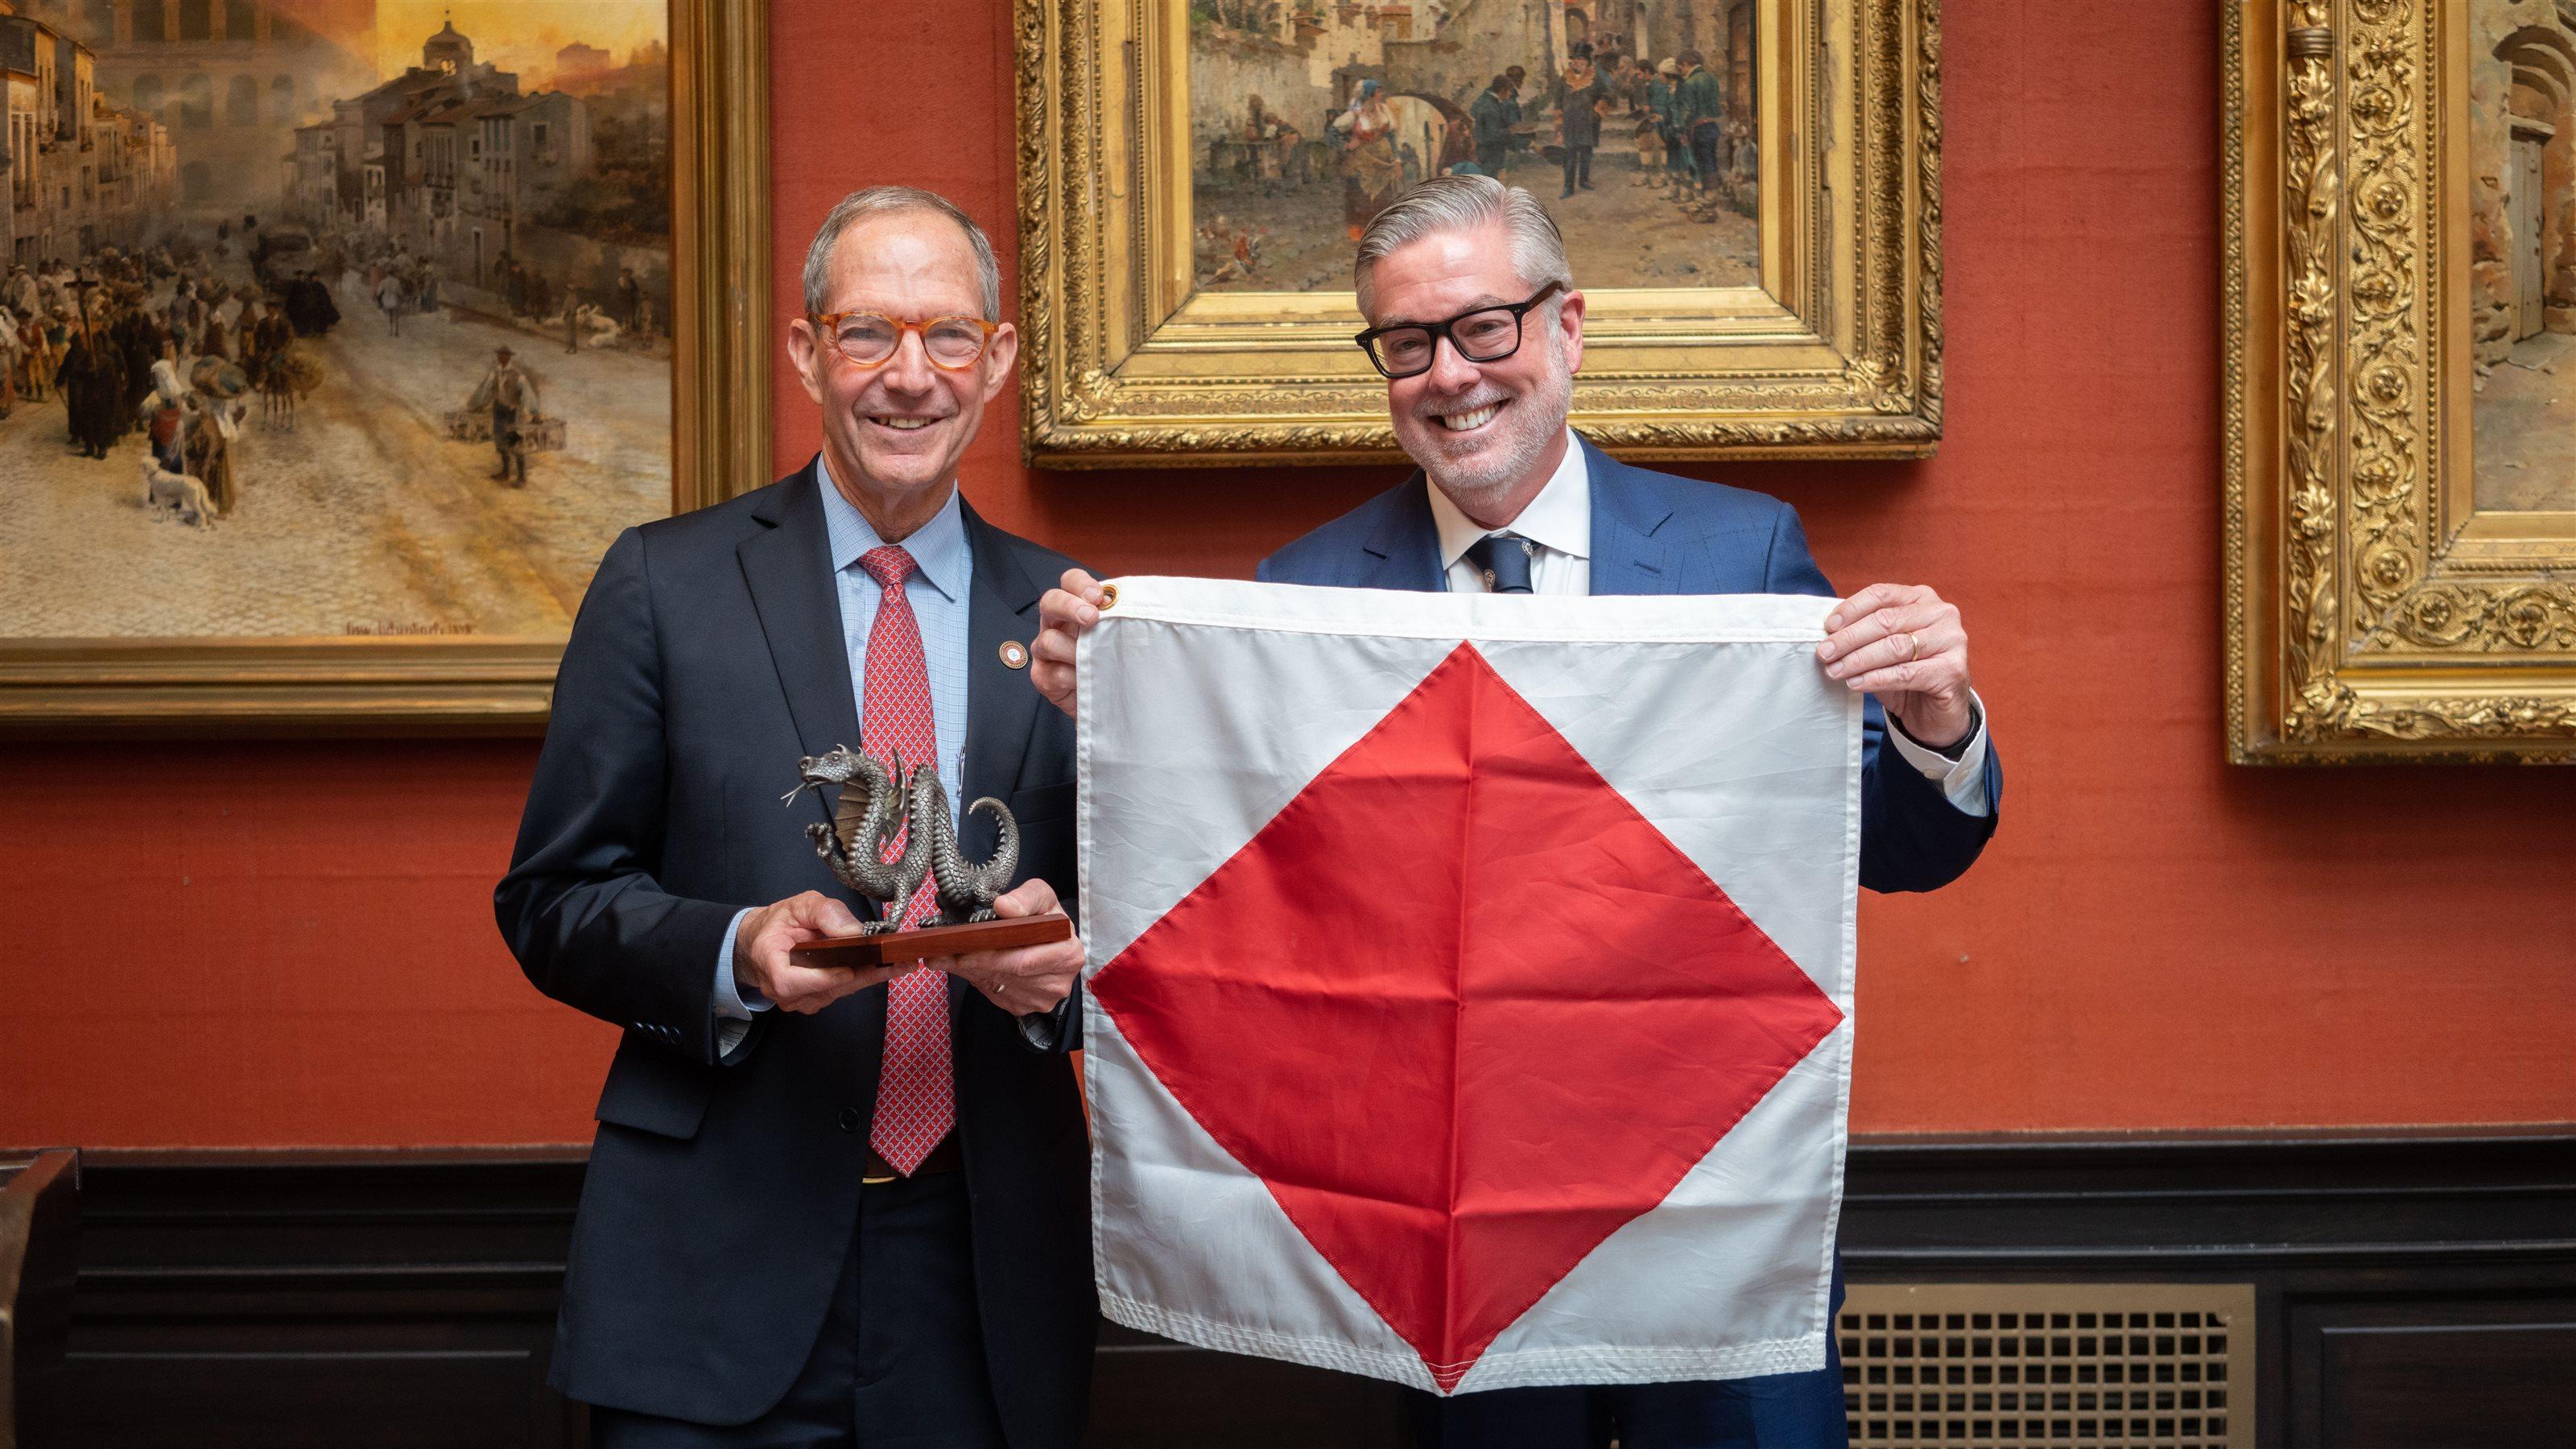 Salus University President Michael Mittelman (left) and Drexel University President John Fry standing next to each other in A.J. Drexel Picture Gallery. Michael is holding Drexel’s Mario the dragon  figurine while John holds Salus’ flag (white background with red diamond in the center).